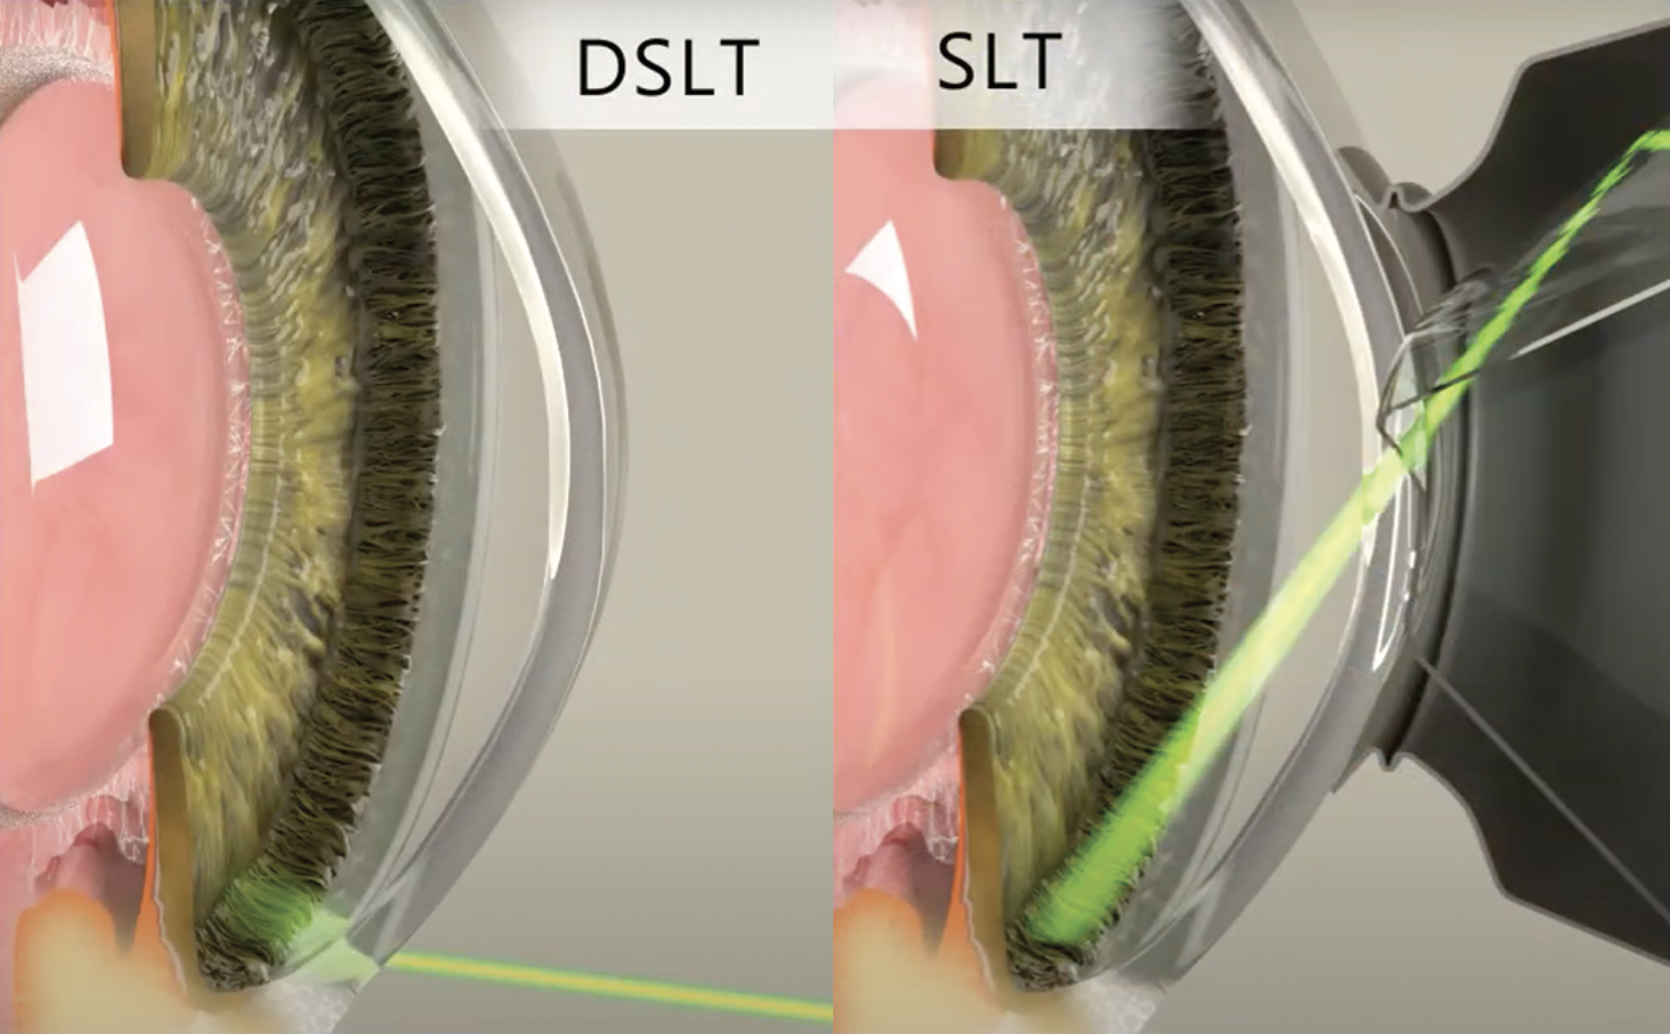 A newer technique known as direct SLT obviates the need for a gonio lens by delivering laser energy directly through the limbal area. This may allow more optometrists to transition their practices to offering SLT, as the learning curve may be lower than in traditional SLT.